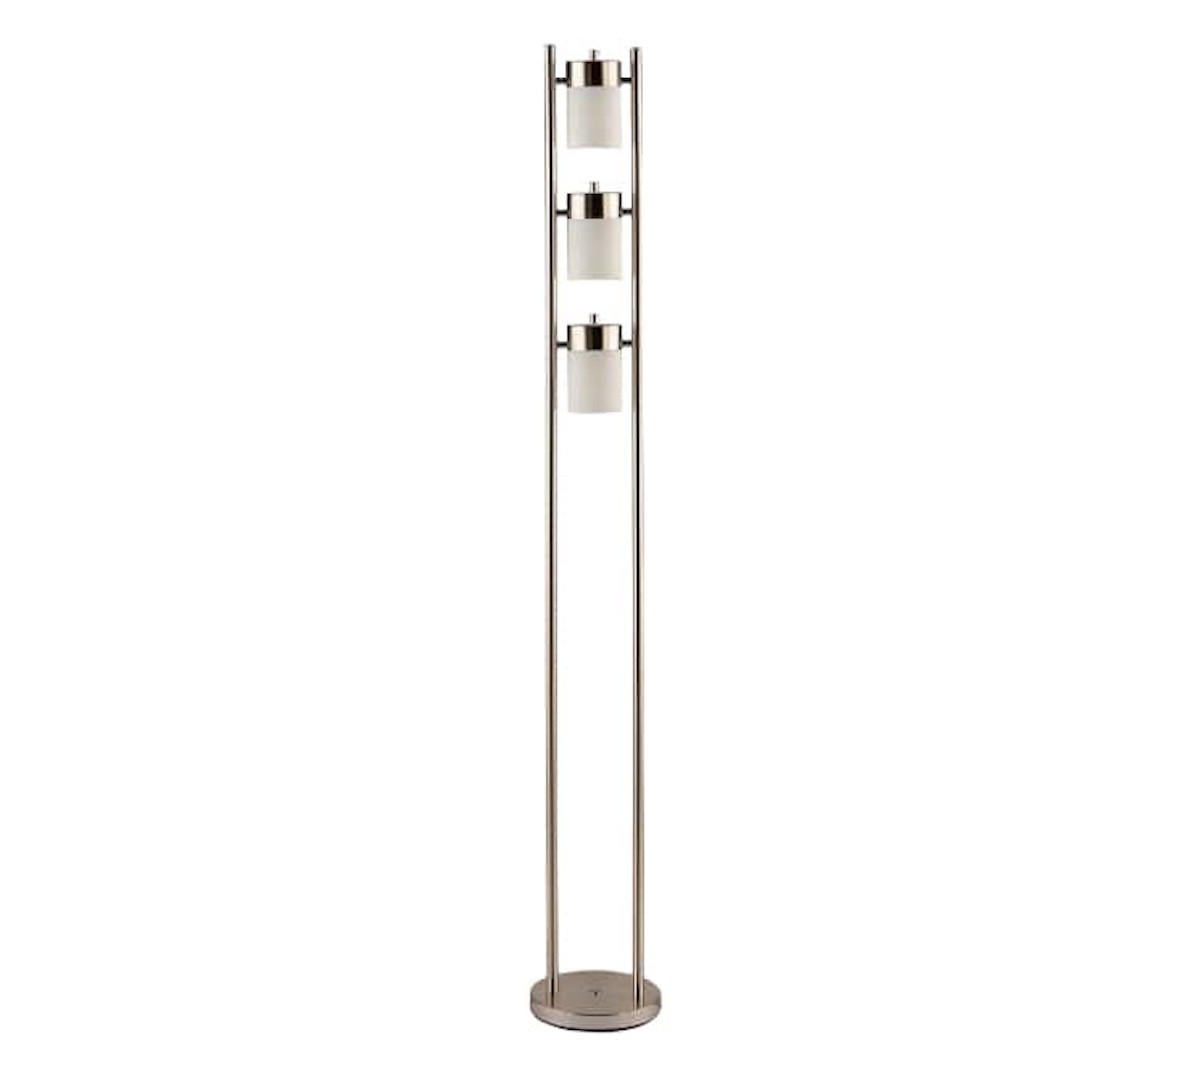 Home theater decor: Munson Floor Lamp with 3 Swivel Lights Brushed Silver